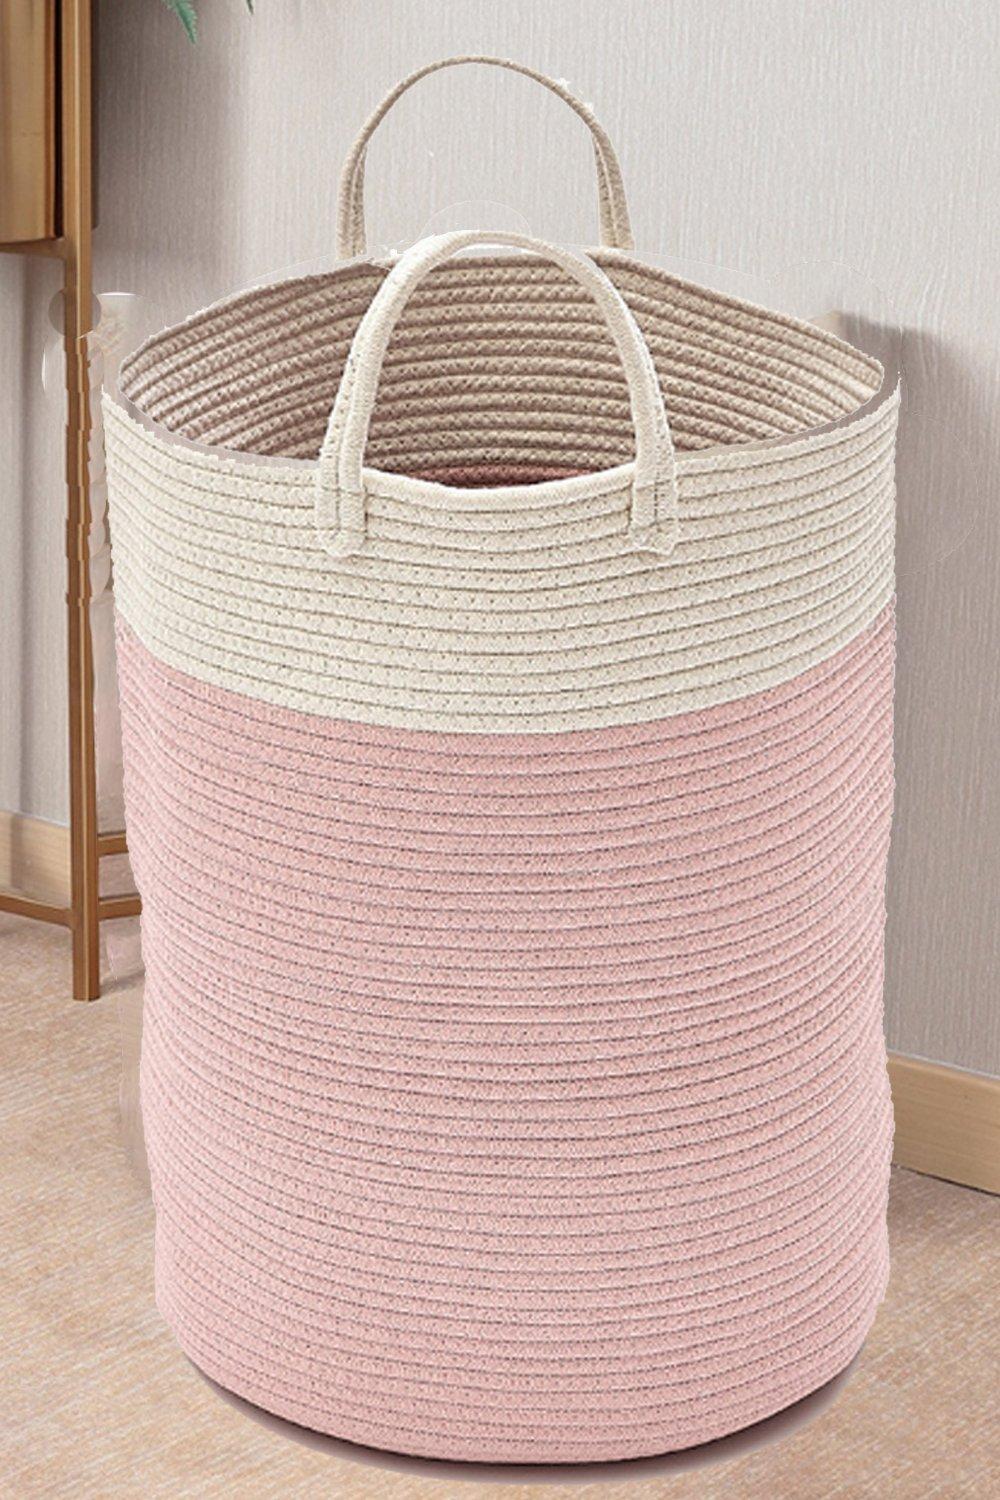 63L Woven Cotton Rope Laundry Hamper Basket Toys Storage with Handlers Pink 50cm H